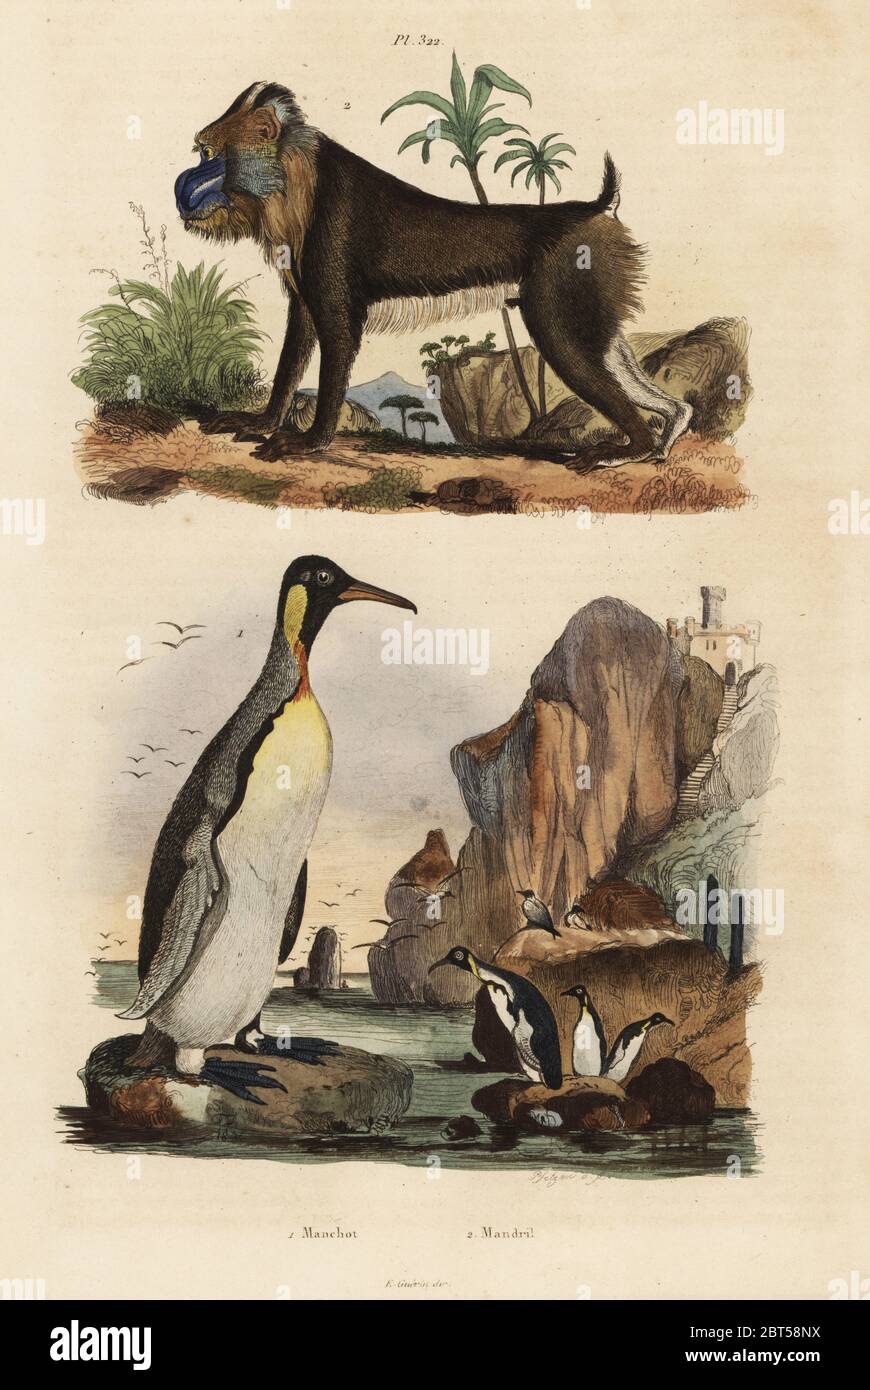 King penguin, Aptenodytes patagonicus 1, and mandrill, Mandrillus sphinx, vulnerable, 2. Manchot, mandril. Handcoloured steel engraving by Pfitzer after an illustration by Adolph Fries from Felix-Edouard Guerin-Meneville's Dictionnaire Pittoresque d'Histoire . Naturelle (Picturesque Dictionary of Natural History), Paris, 1834-39. Stock Photo